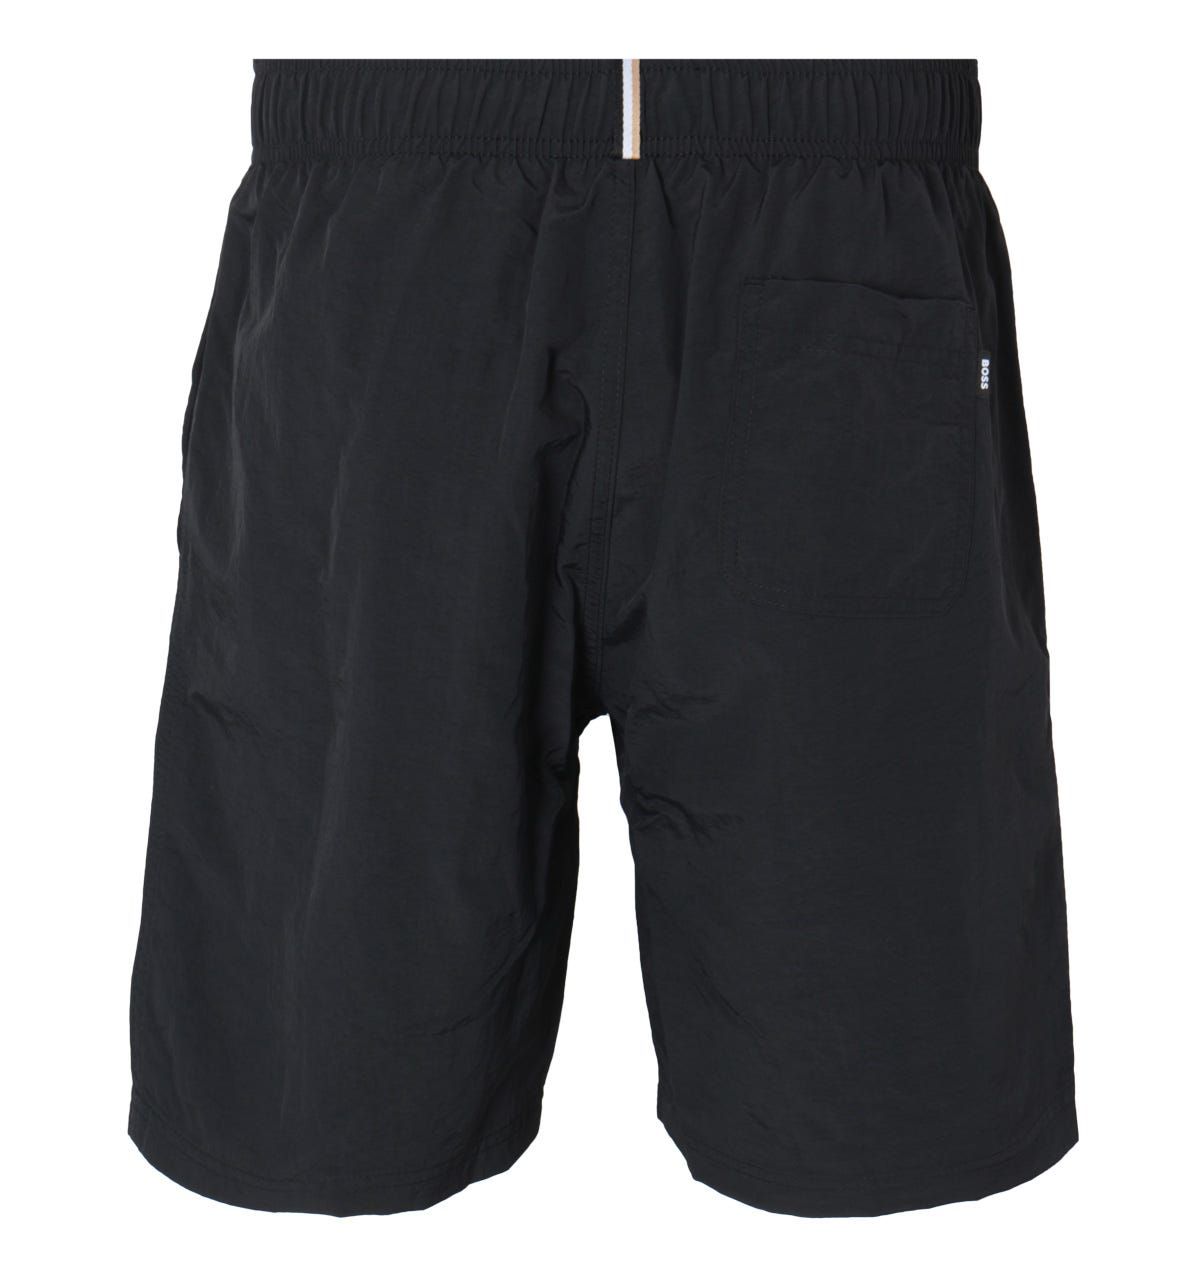 Swim in style this season with BOSS bodywear. These sporty swim shorts are crafted from a quick drying nylon fabric with a mesh lining for extra support. Featuring an elasticated drawstring waist, twin side seam pockets and a rear welt pocket. Finished with a large BOSS logo embroidered to the left leg.\nRegular Fit, Quick Dry Nylon, Elasticated Drawstring Waist, Twin Side Seam Pockets, Rear Welt Pocket,